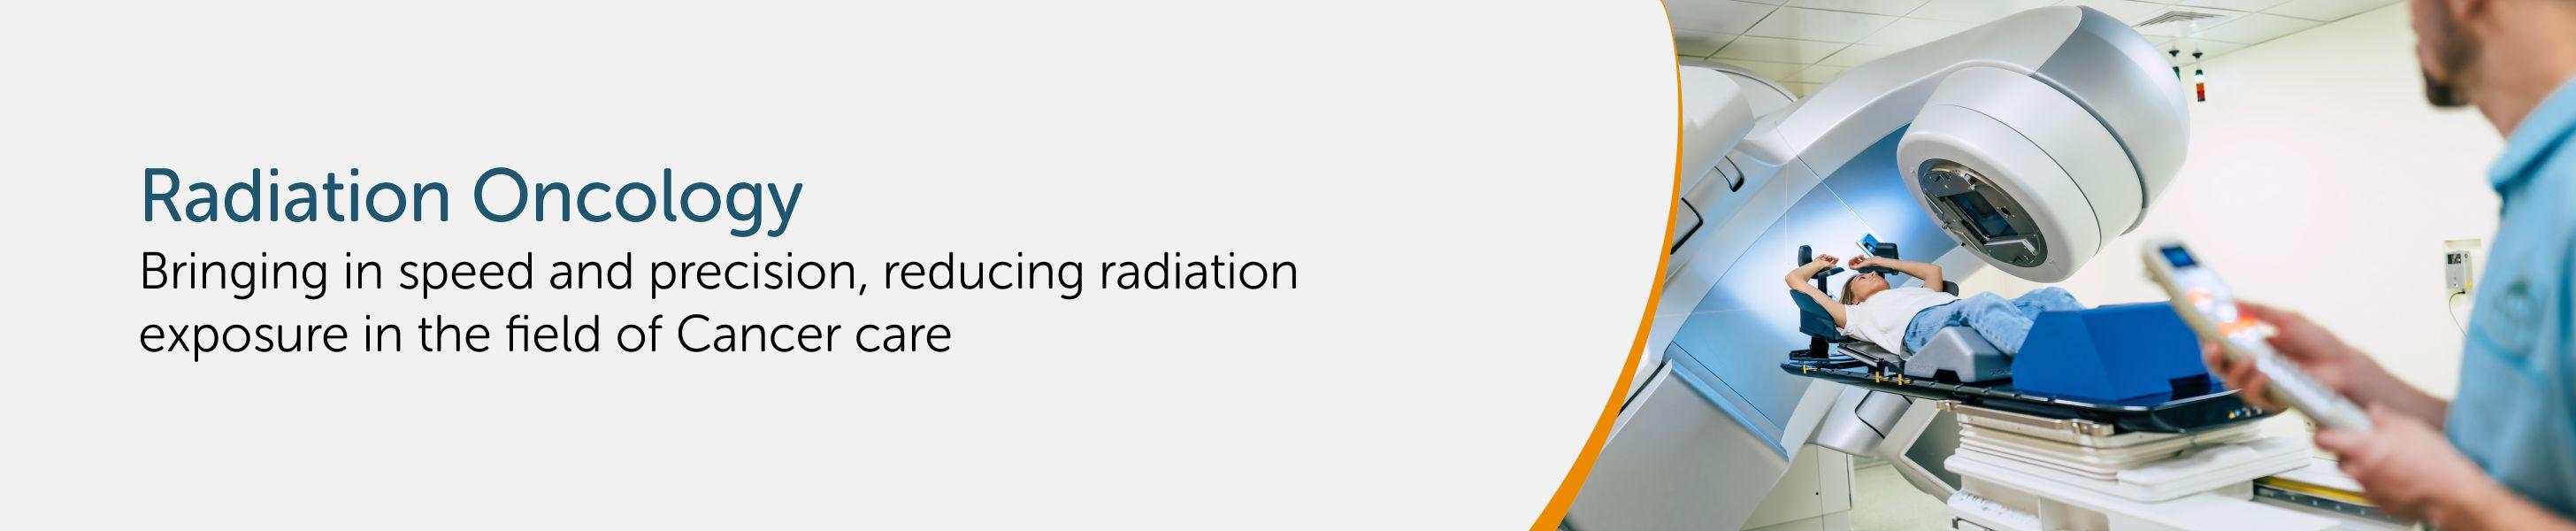 1456 X 300 - Radiation Oncology